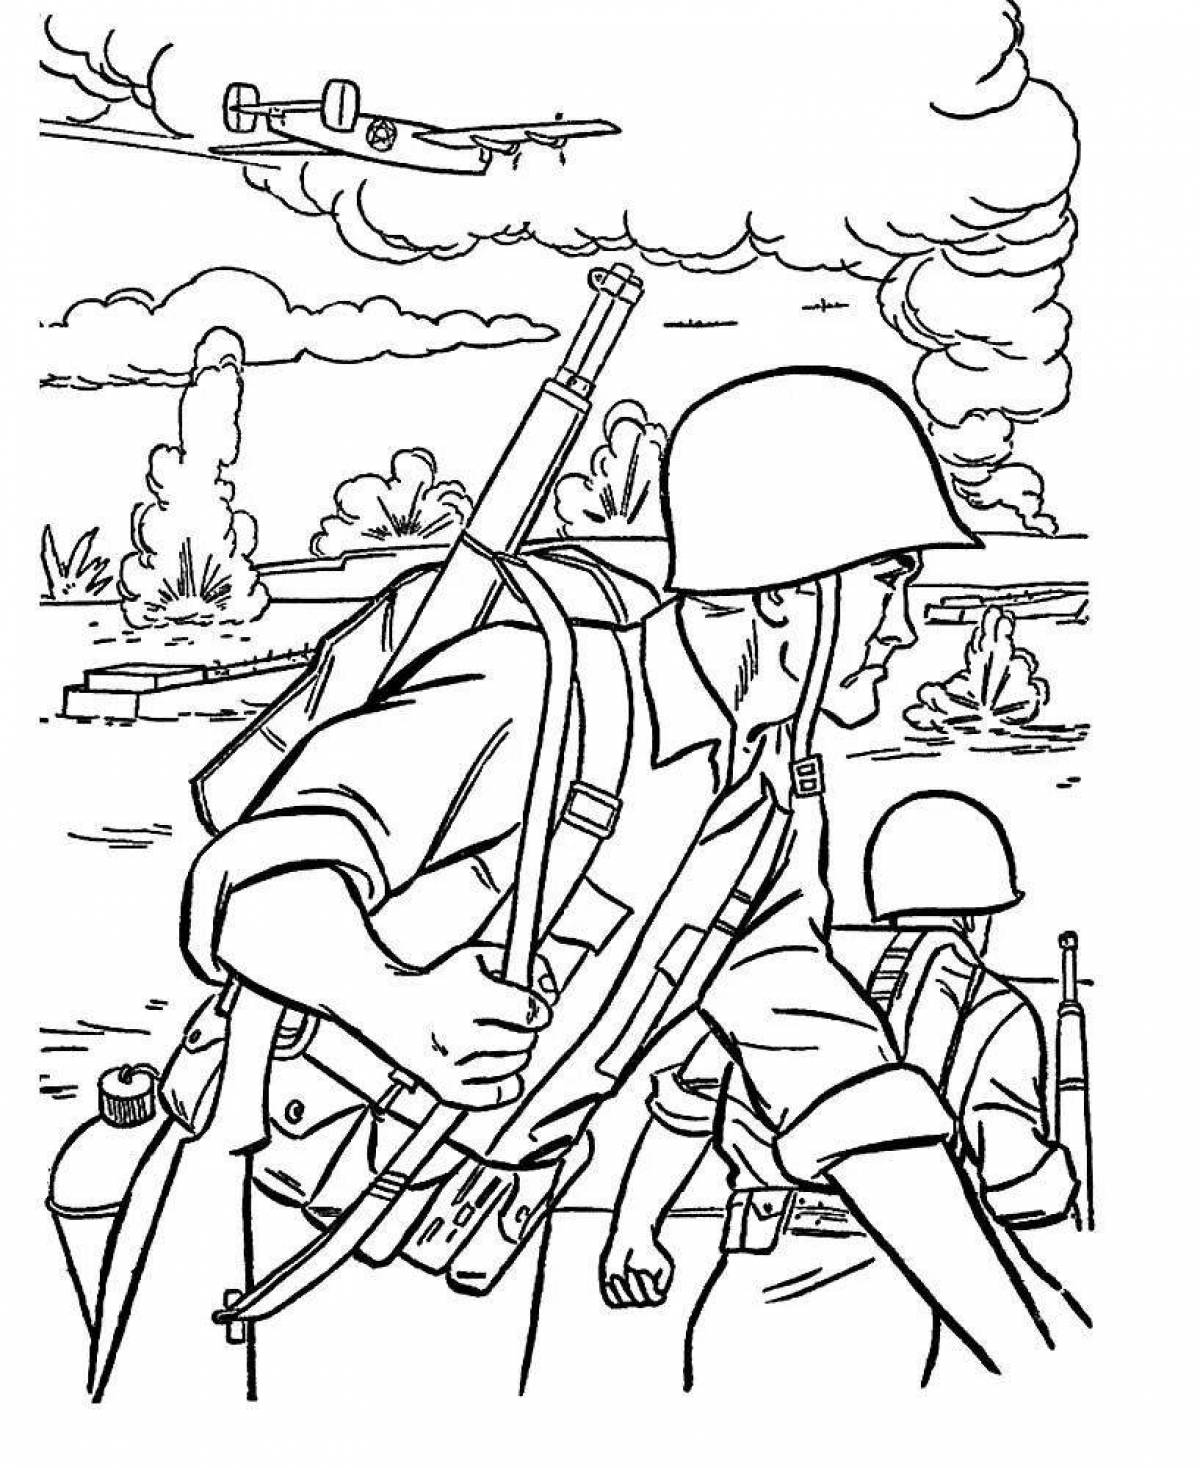 Impressive soldier coloring pages for 6-7 year olds